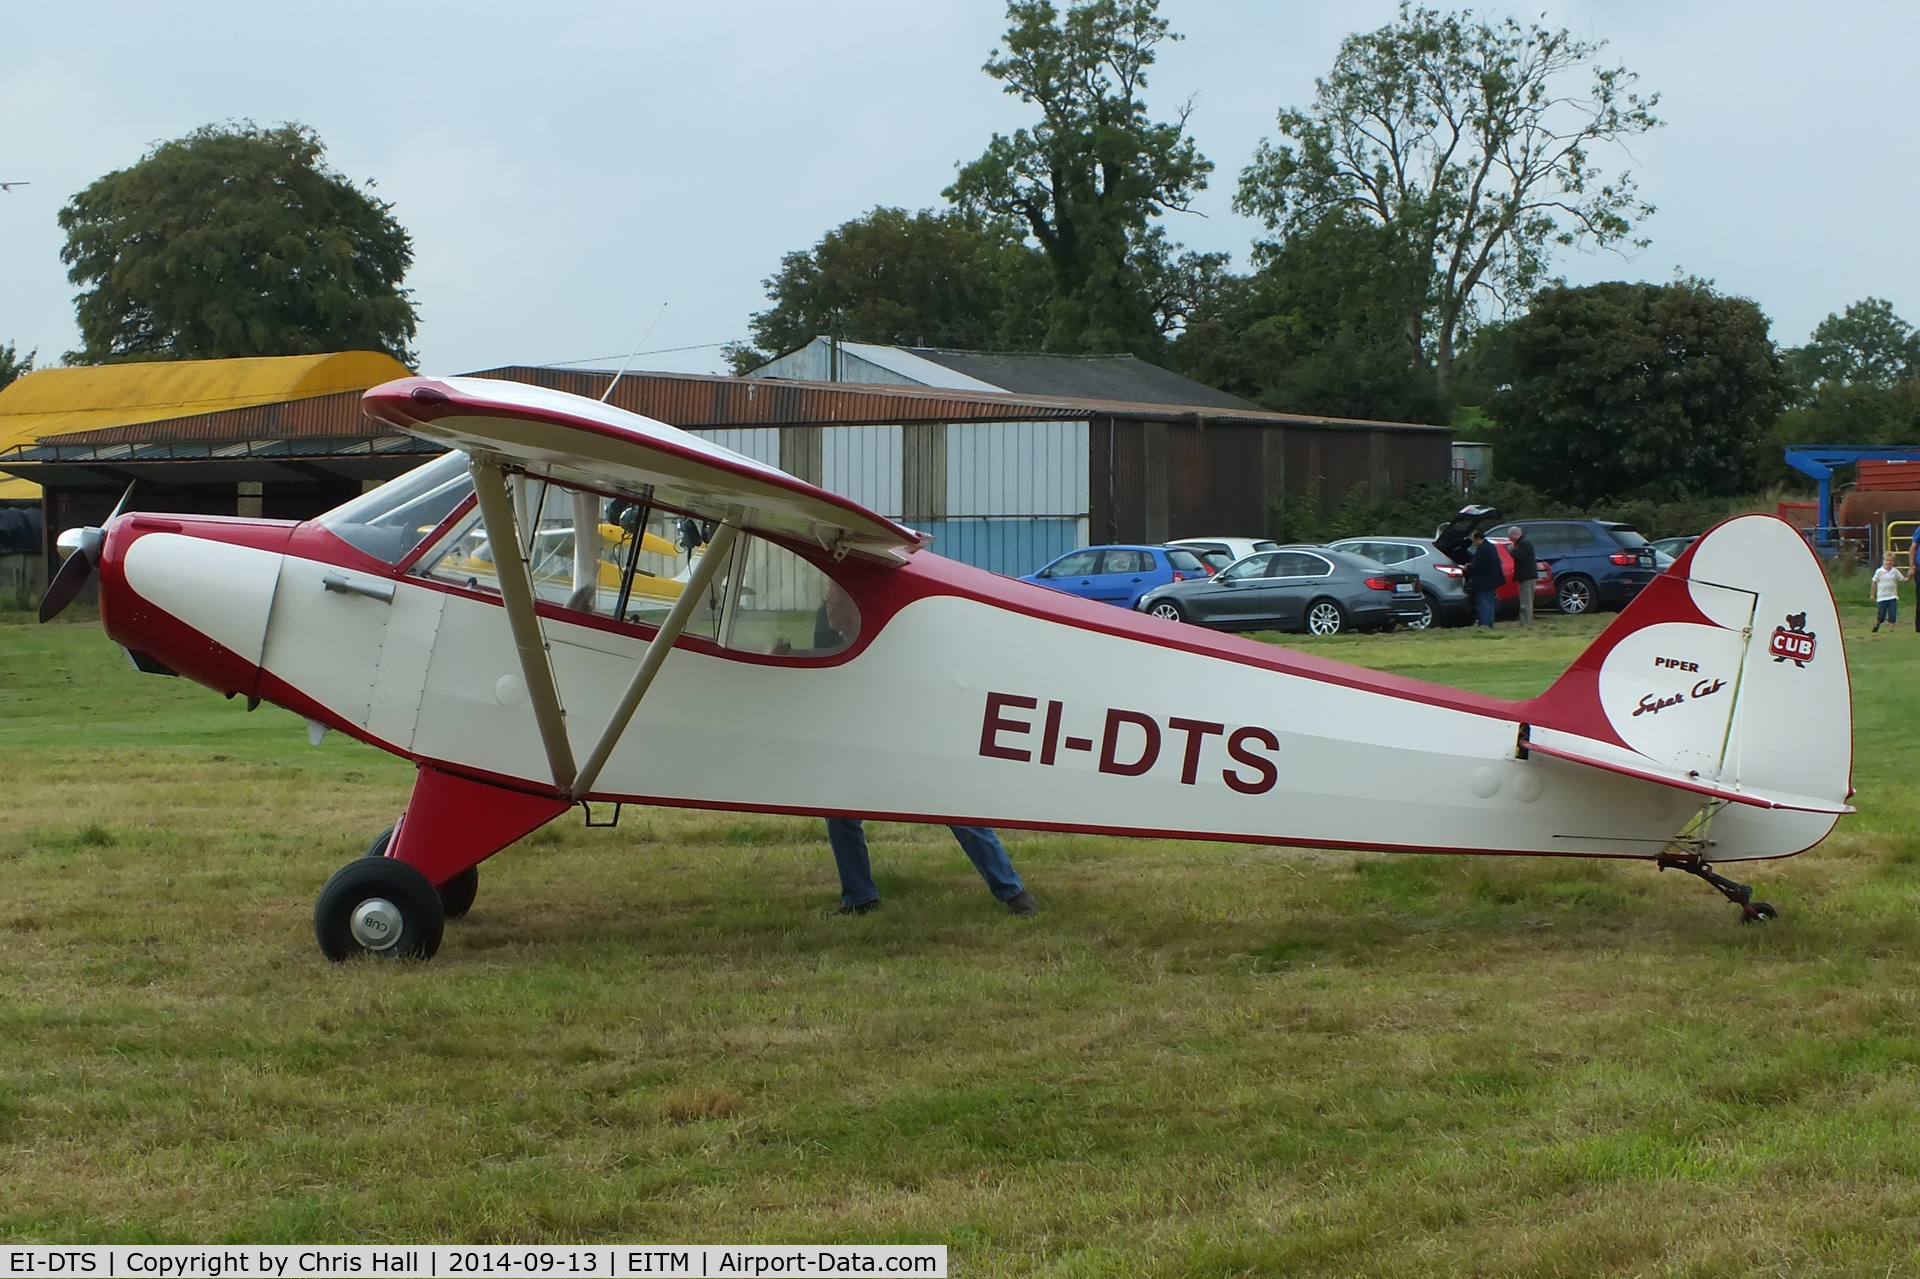 EI-DTS, 1957 Piper PA-18-95 Super Cub C/N 18-5822, at the Trim airfield fly in, County Meath, Ireland